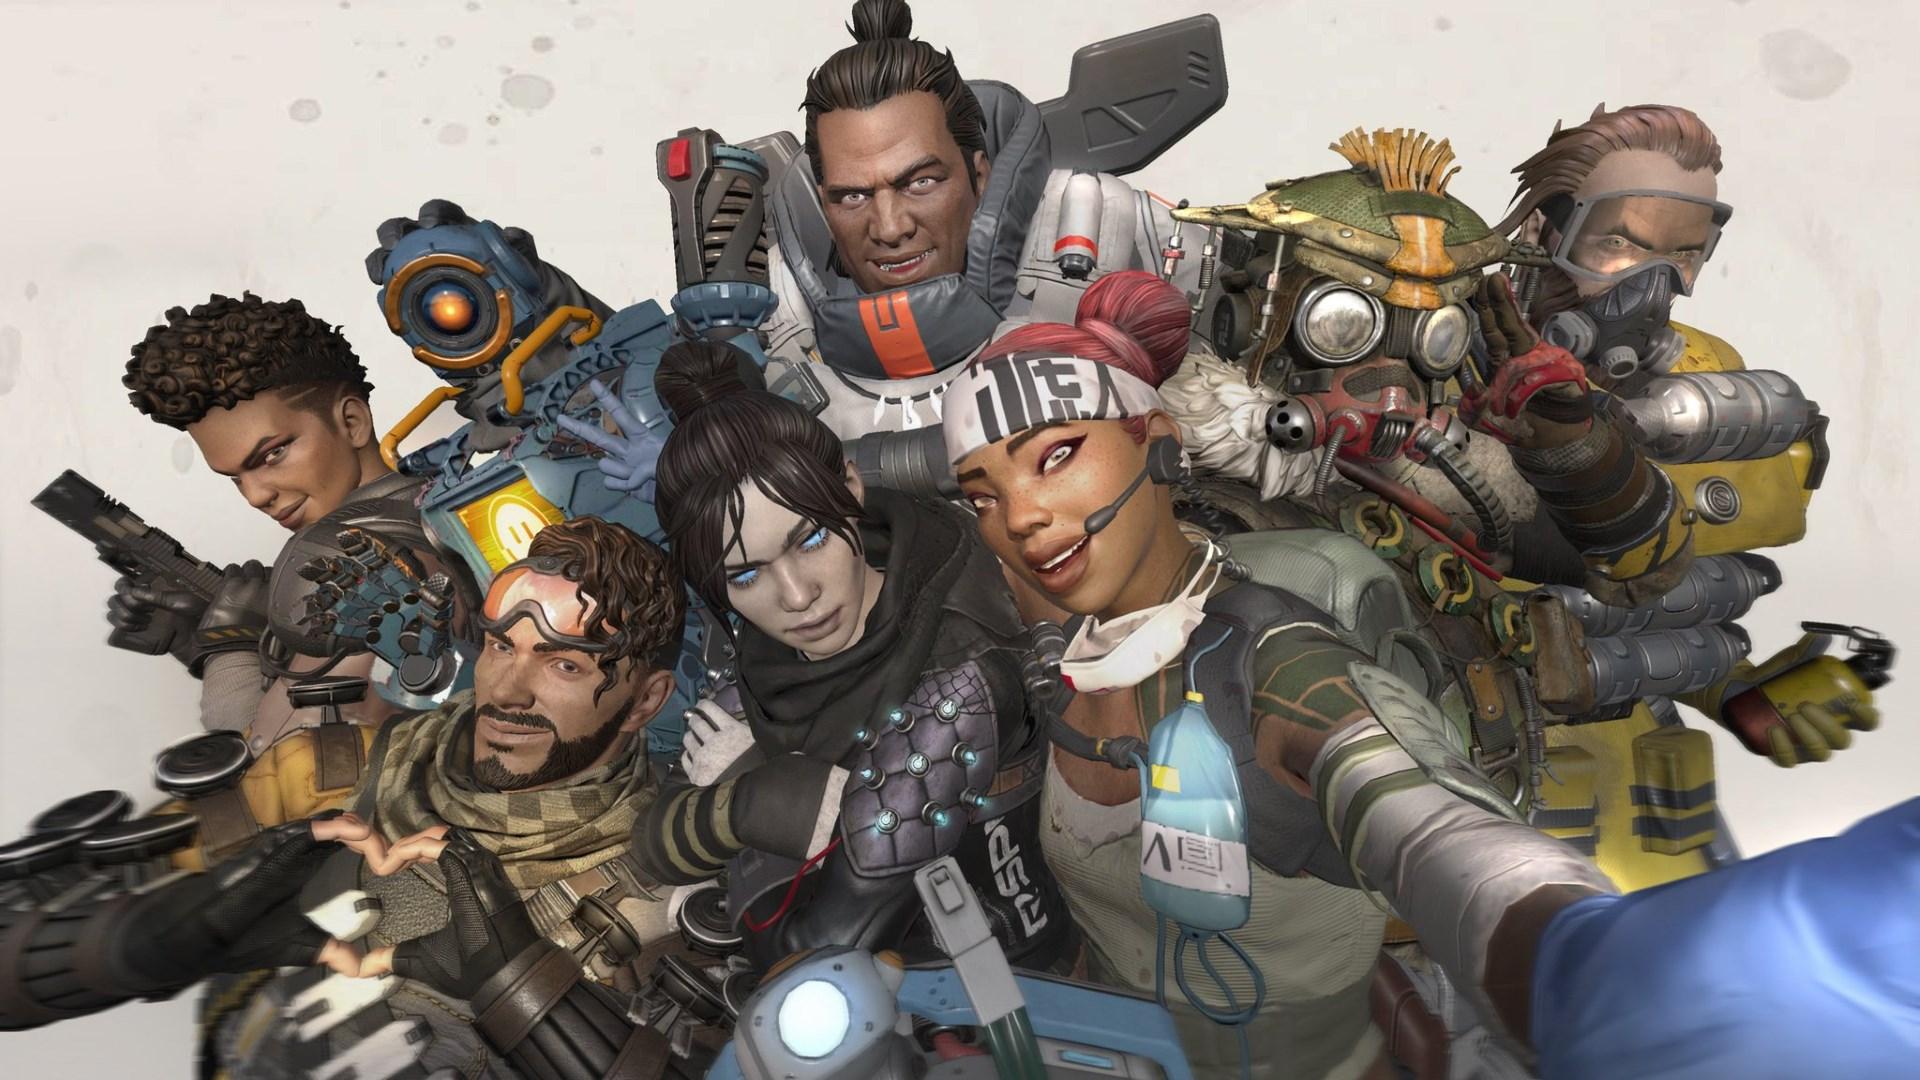 These amazing Apex Legends memes prove the internet is a glorious place